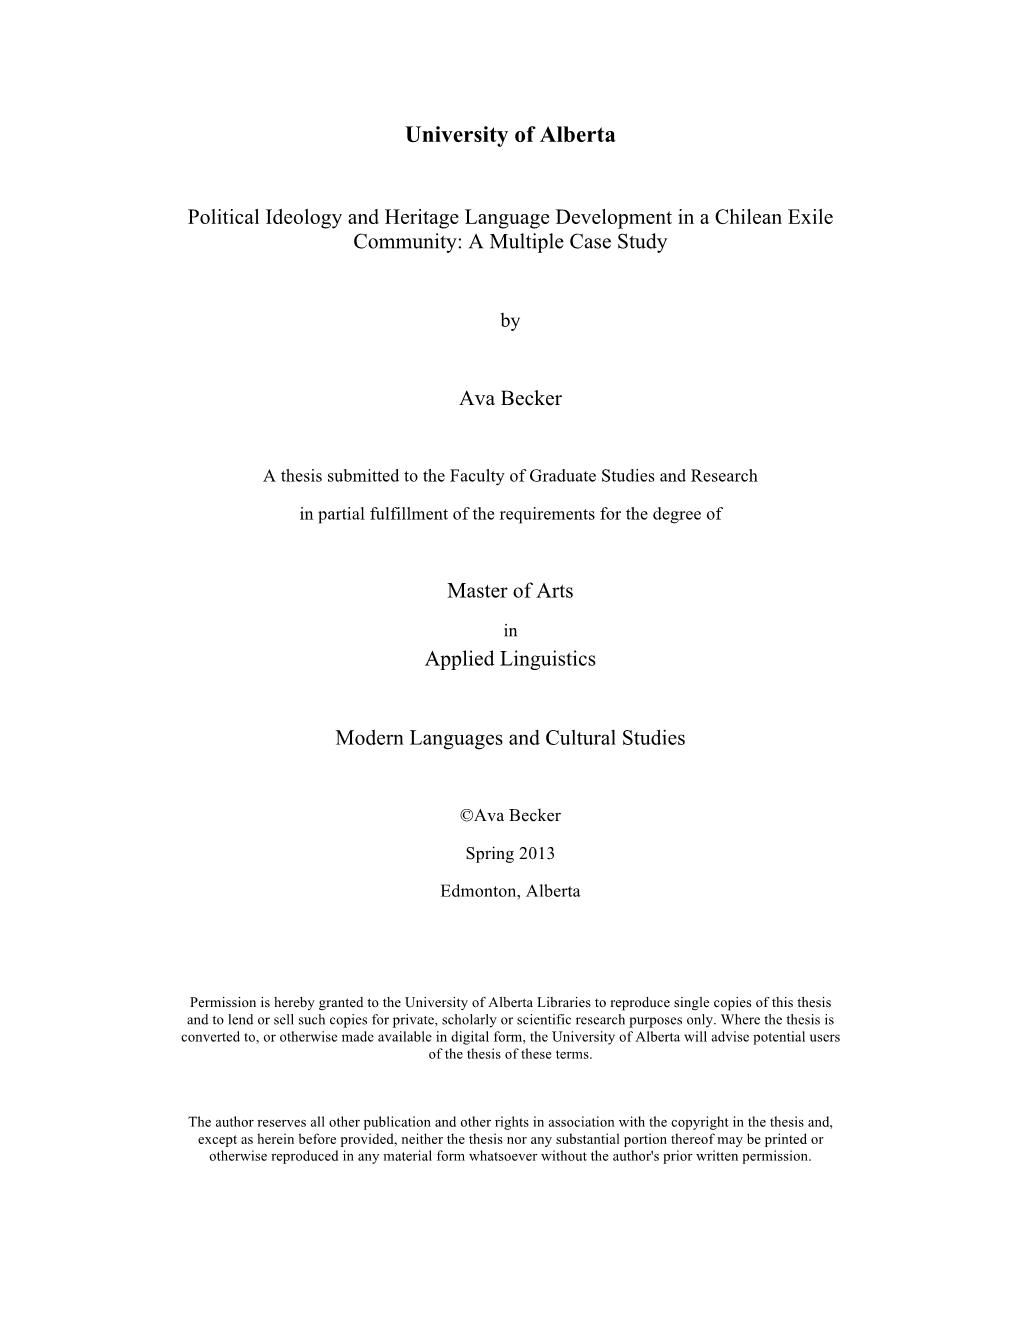 Political Ideology and Heritage Language Development in a Chilean Exile Community: a Multiple Case Study